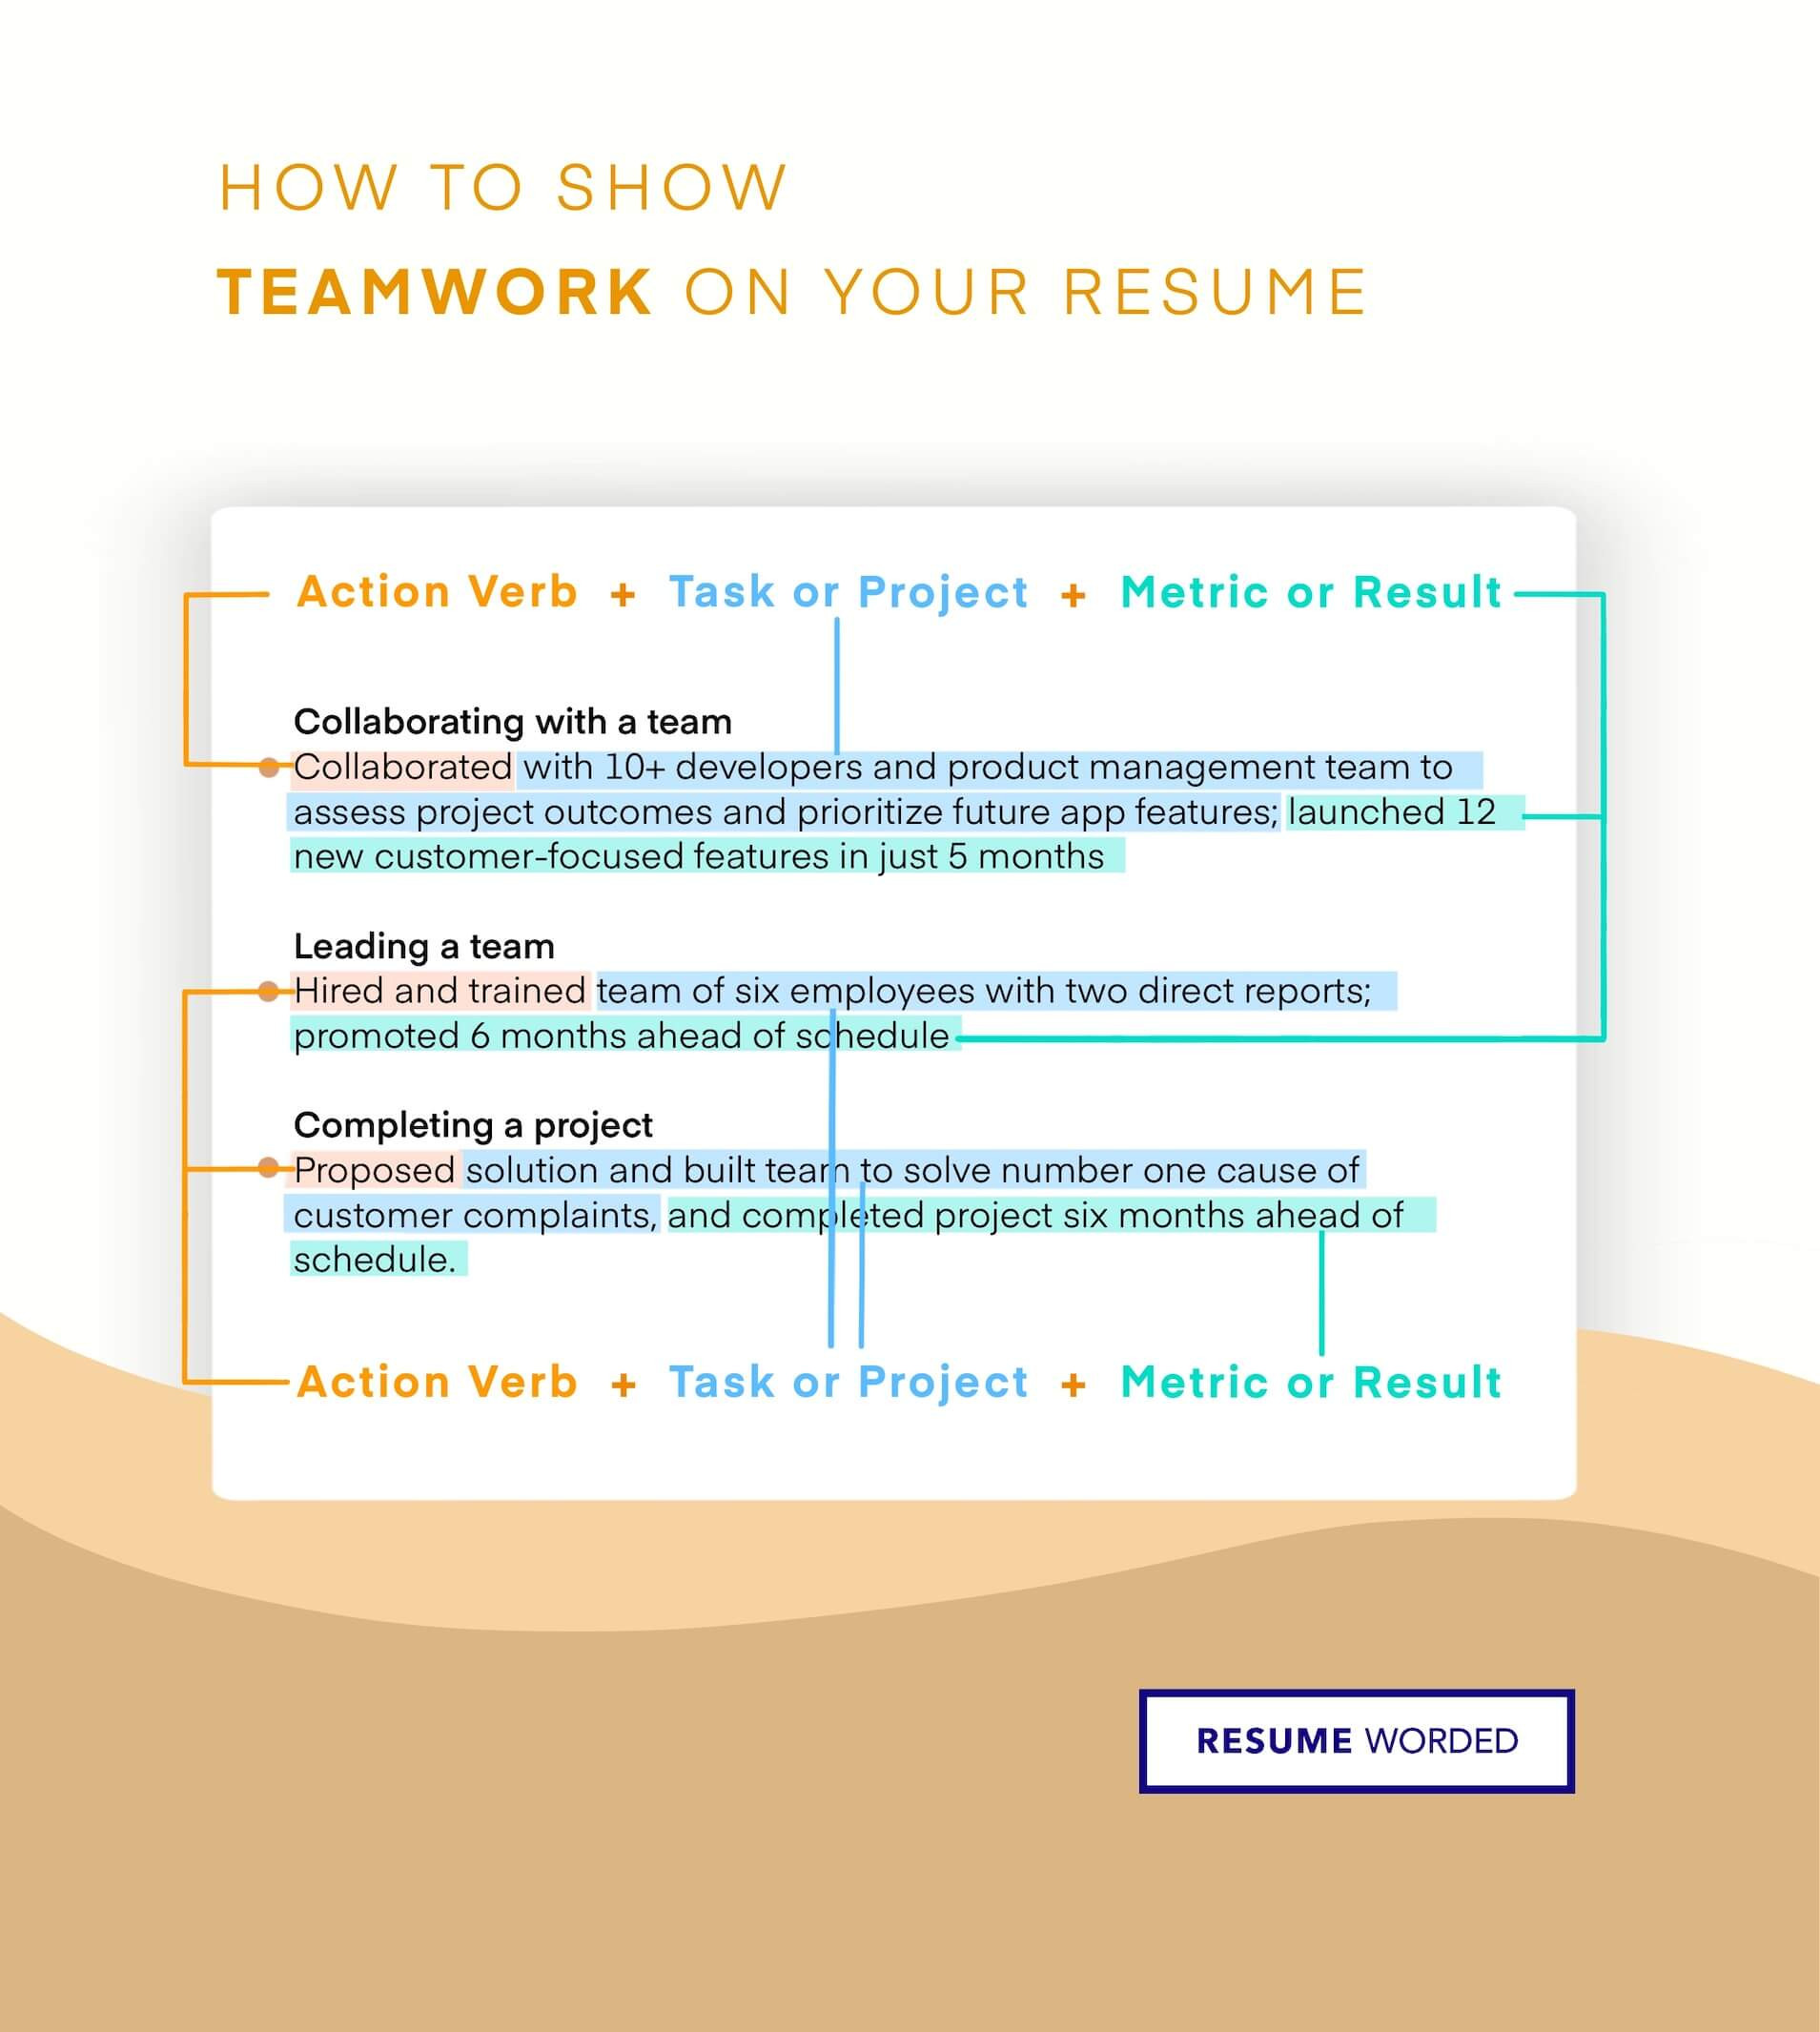 Sample Resume with Action Skill Set How to Demonstrate Teamwork On Your Resume